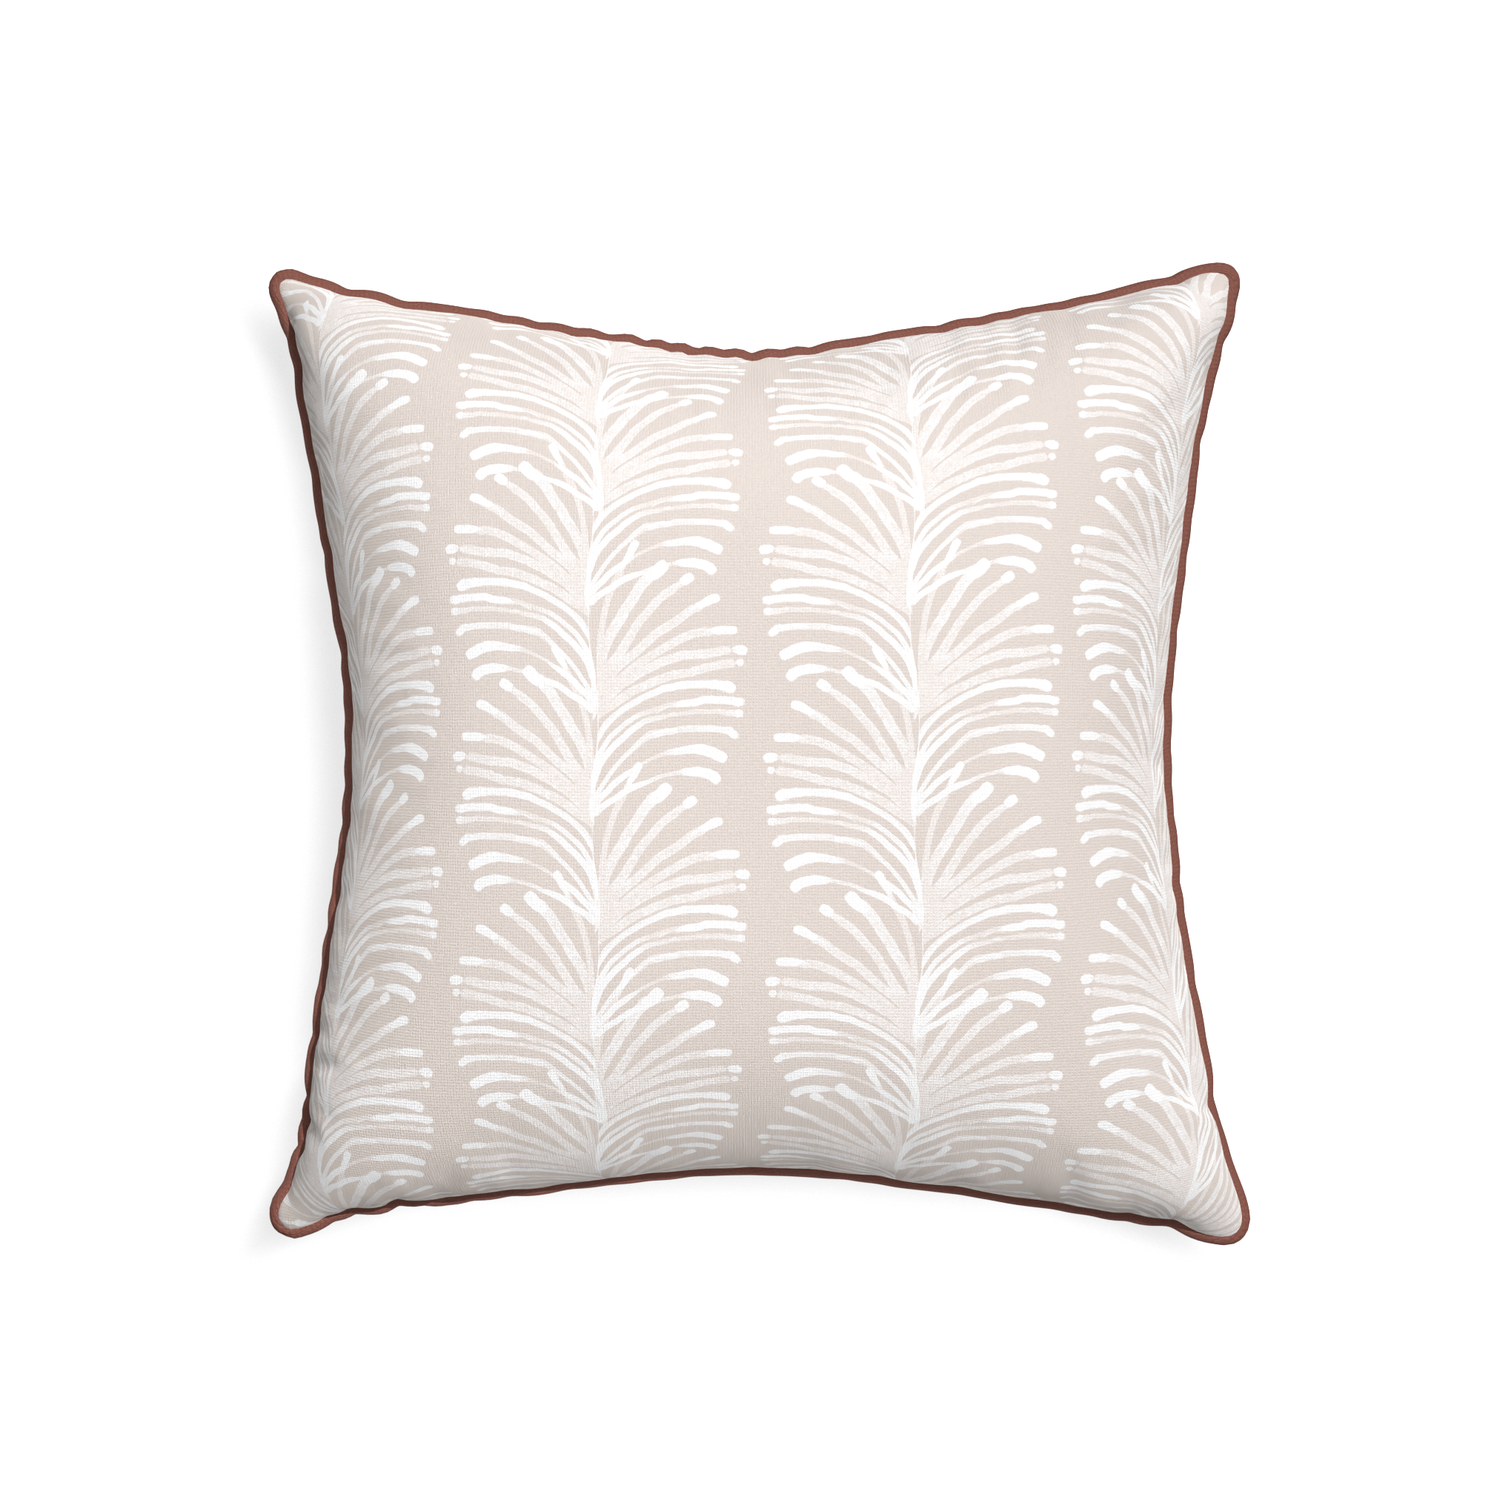 22-square emma sand custom pillow with w piping on white background